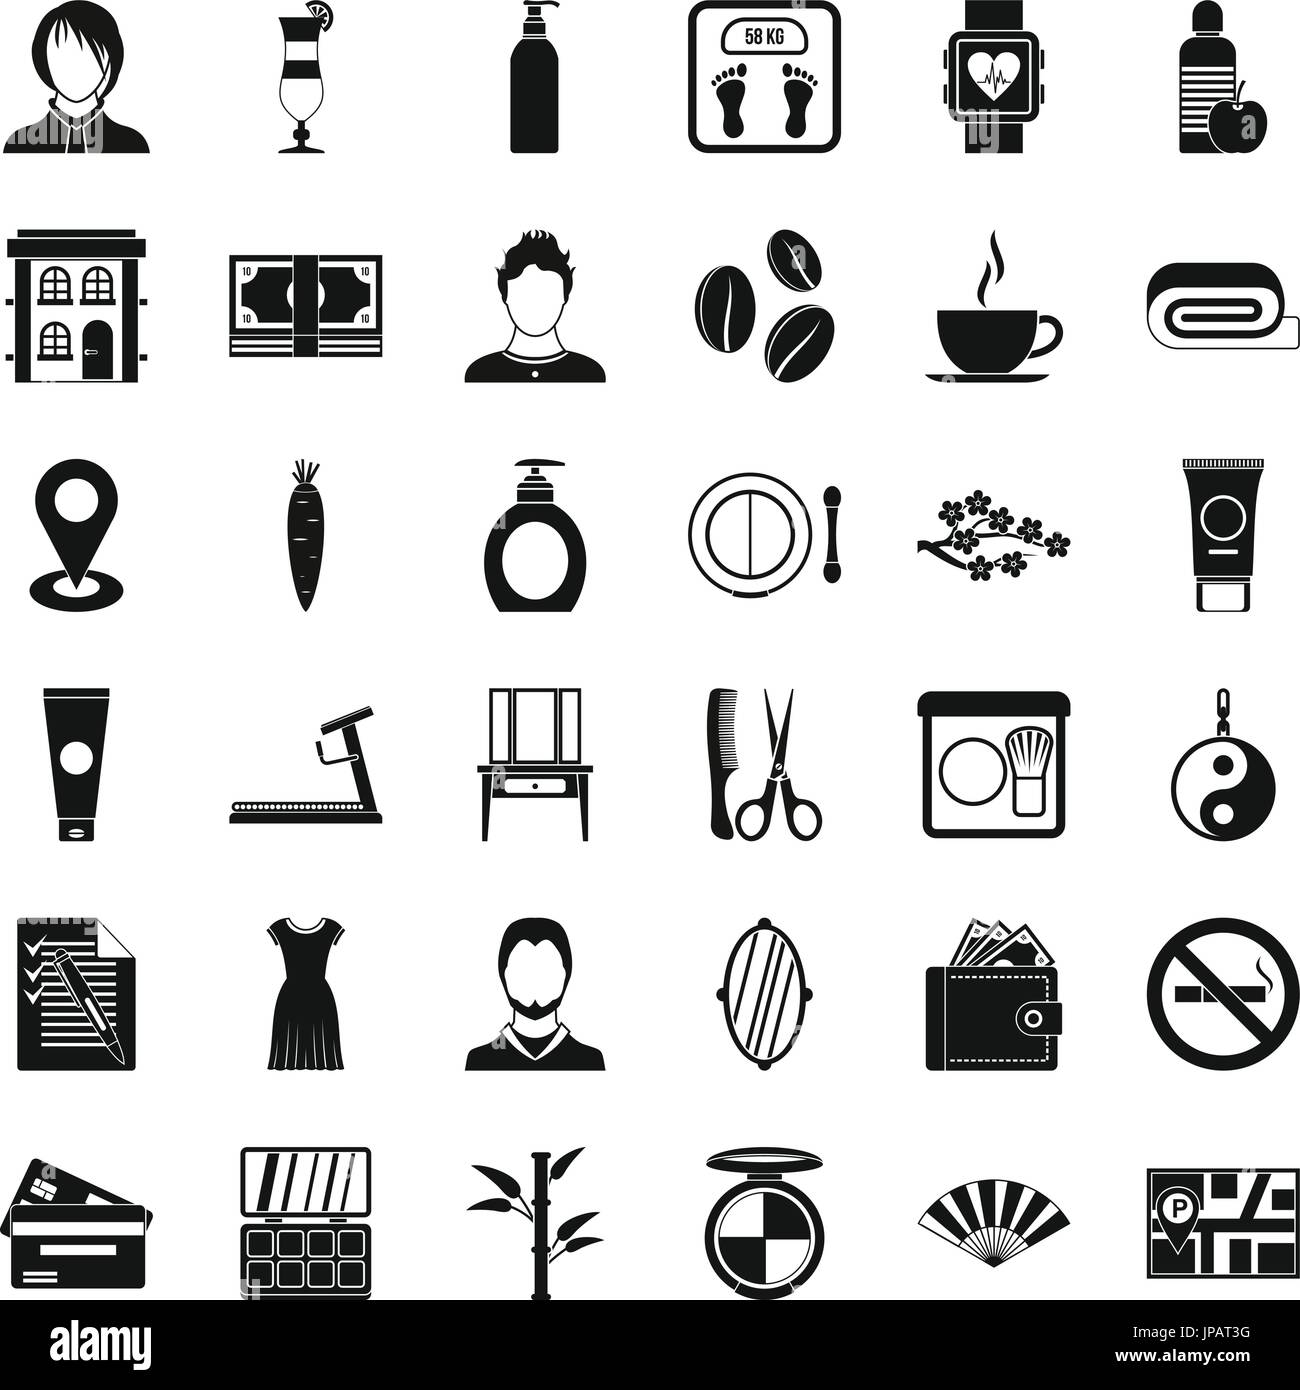 Hairdressing tool icons set, simple style Stock Vector